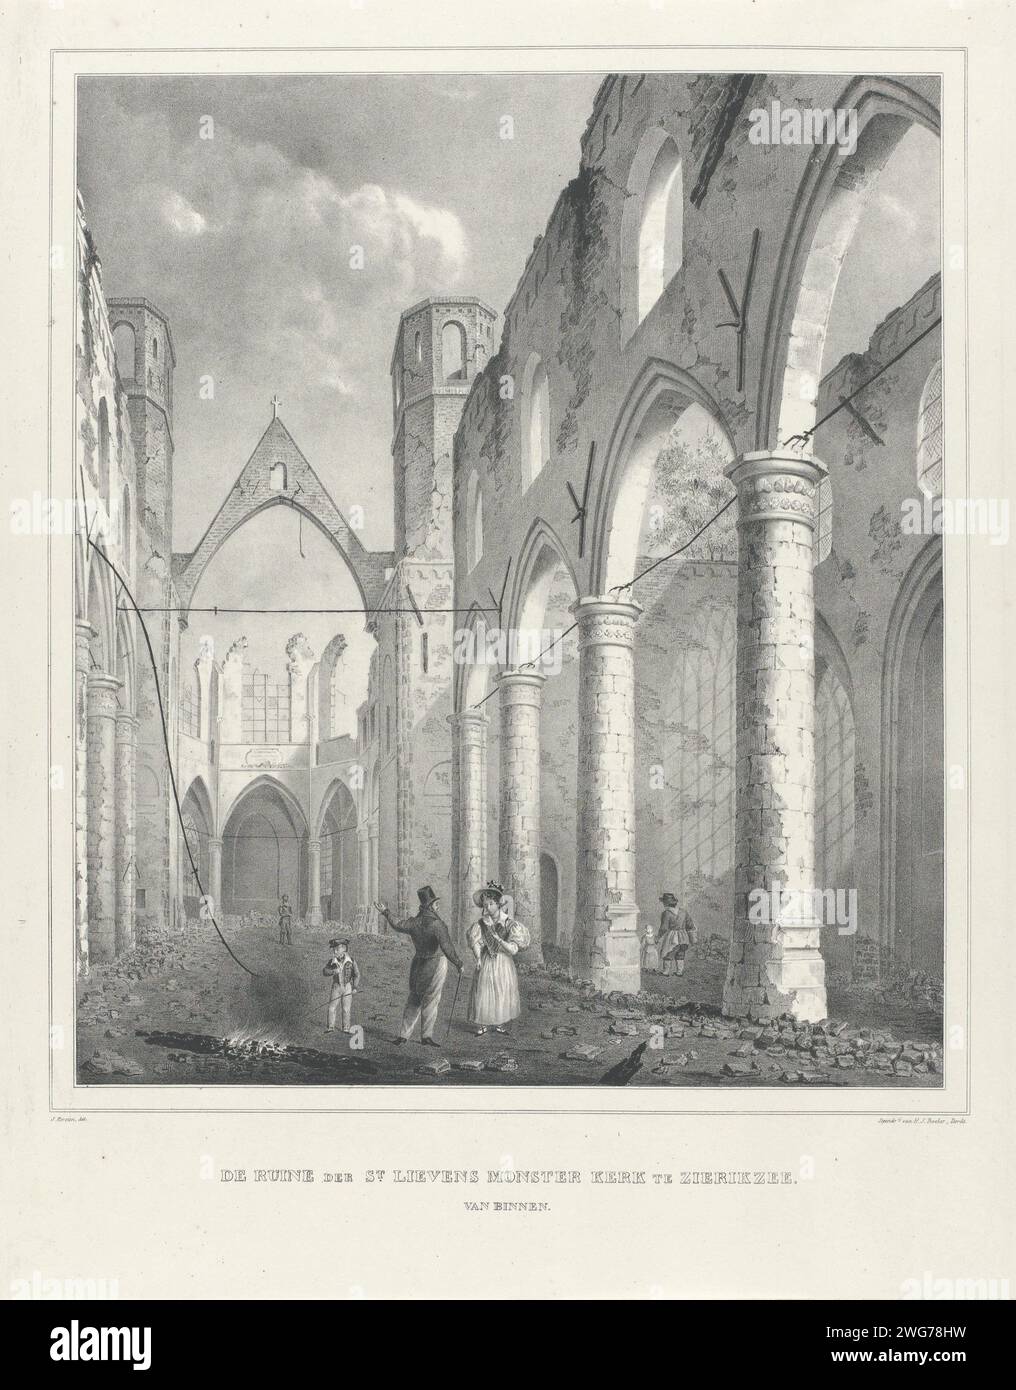 Ruin of the Sint-Lievensmonsterkerk in Zierikzee, after the fire of 1832, 1832 print Ruin of the Sint-Lievensmonsterkerk in Zierikzee, after the fire of October 6, 1832. Face in the interior to where the organ stood. See also the pendant with the church in welfare before the fire. Print Maker: Zierikzee chart Drawing by: Zierikzeeprinter: Dordrecht paper  ruin of church, monastery, etc. Sint-Lievensmonsterkerk Stock Photo